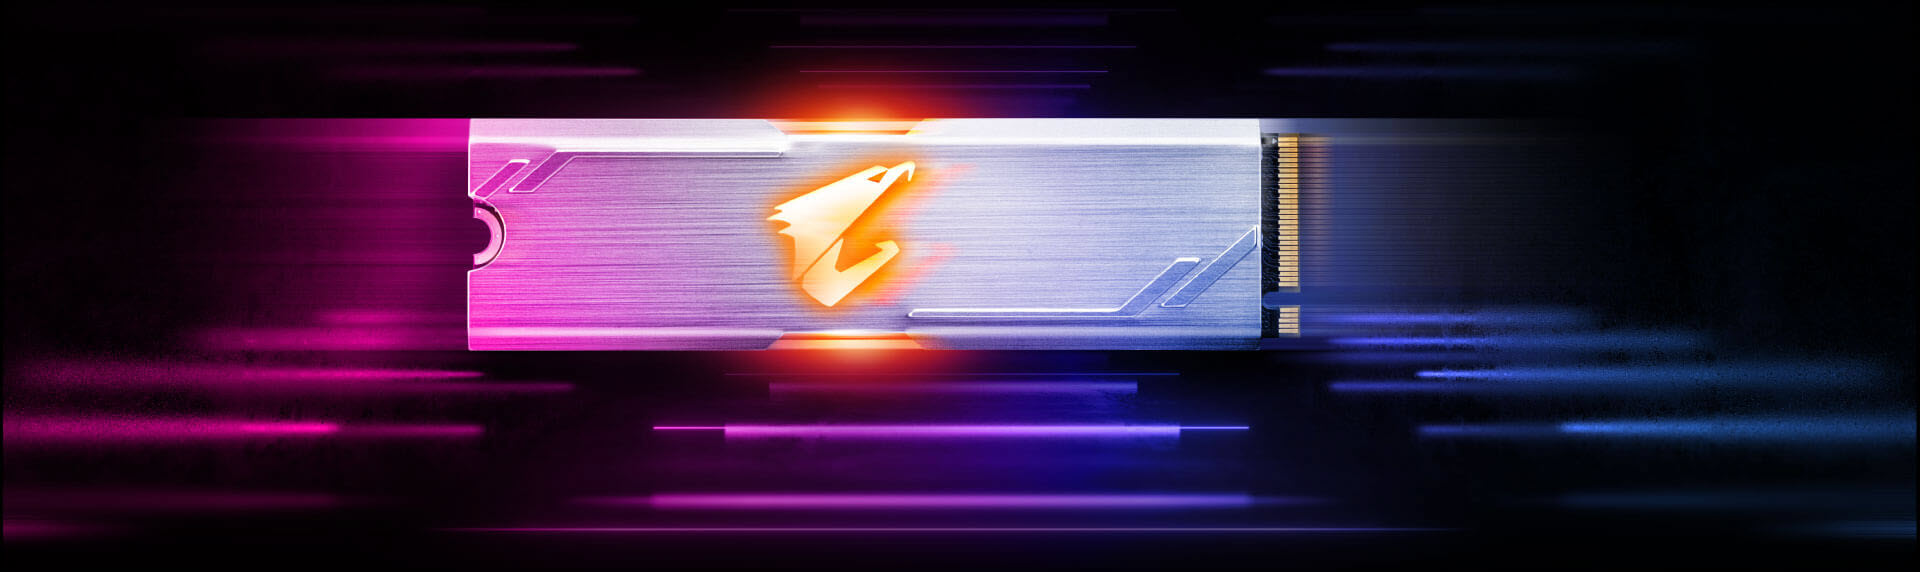 GIGABYTE AORUS M.2 SSD Facing Forward with Pink, Purple and Blue Neon Lines